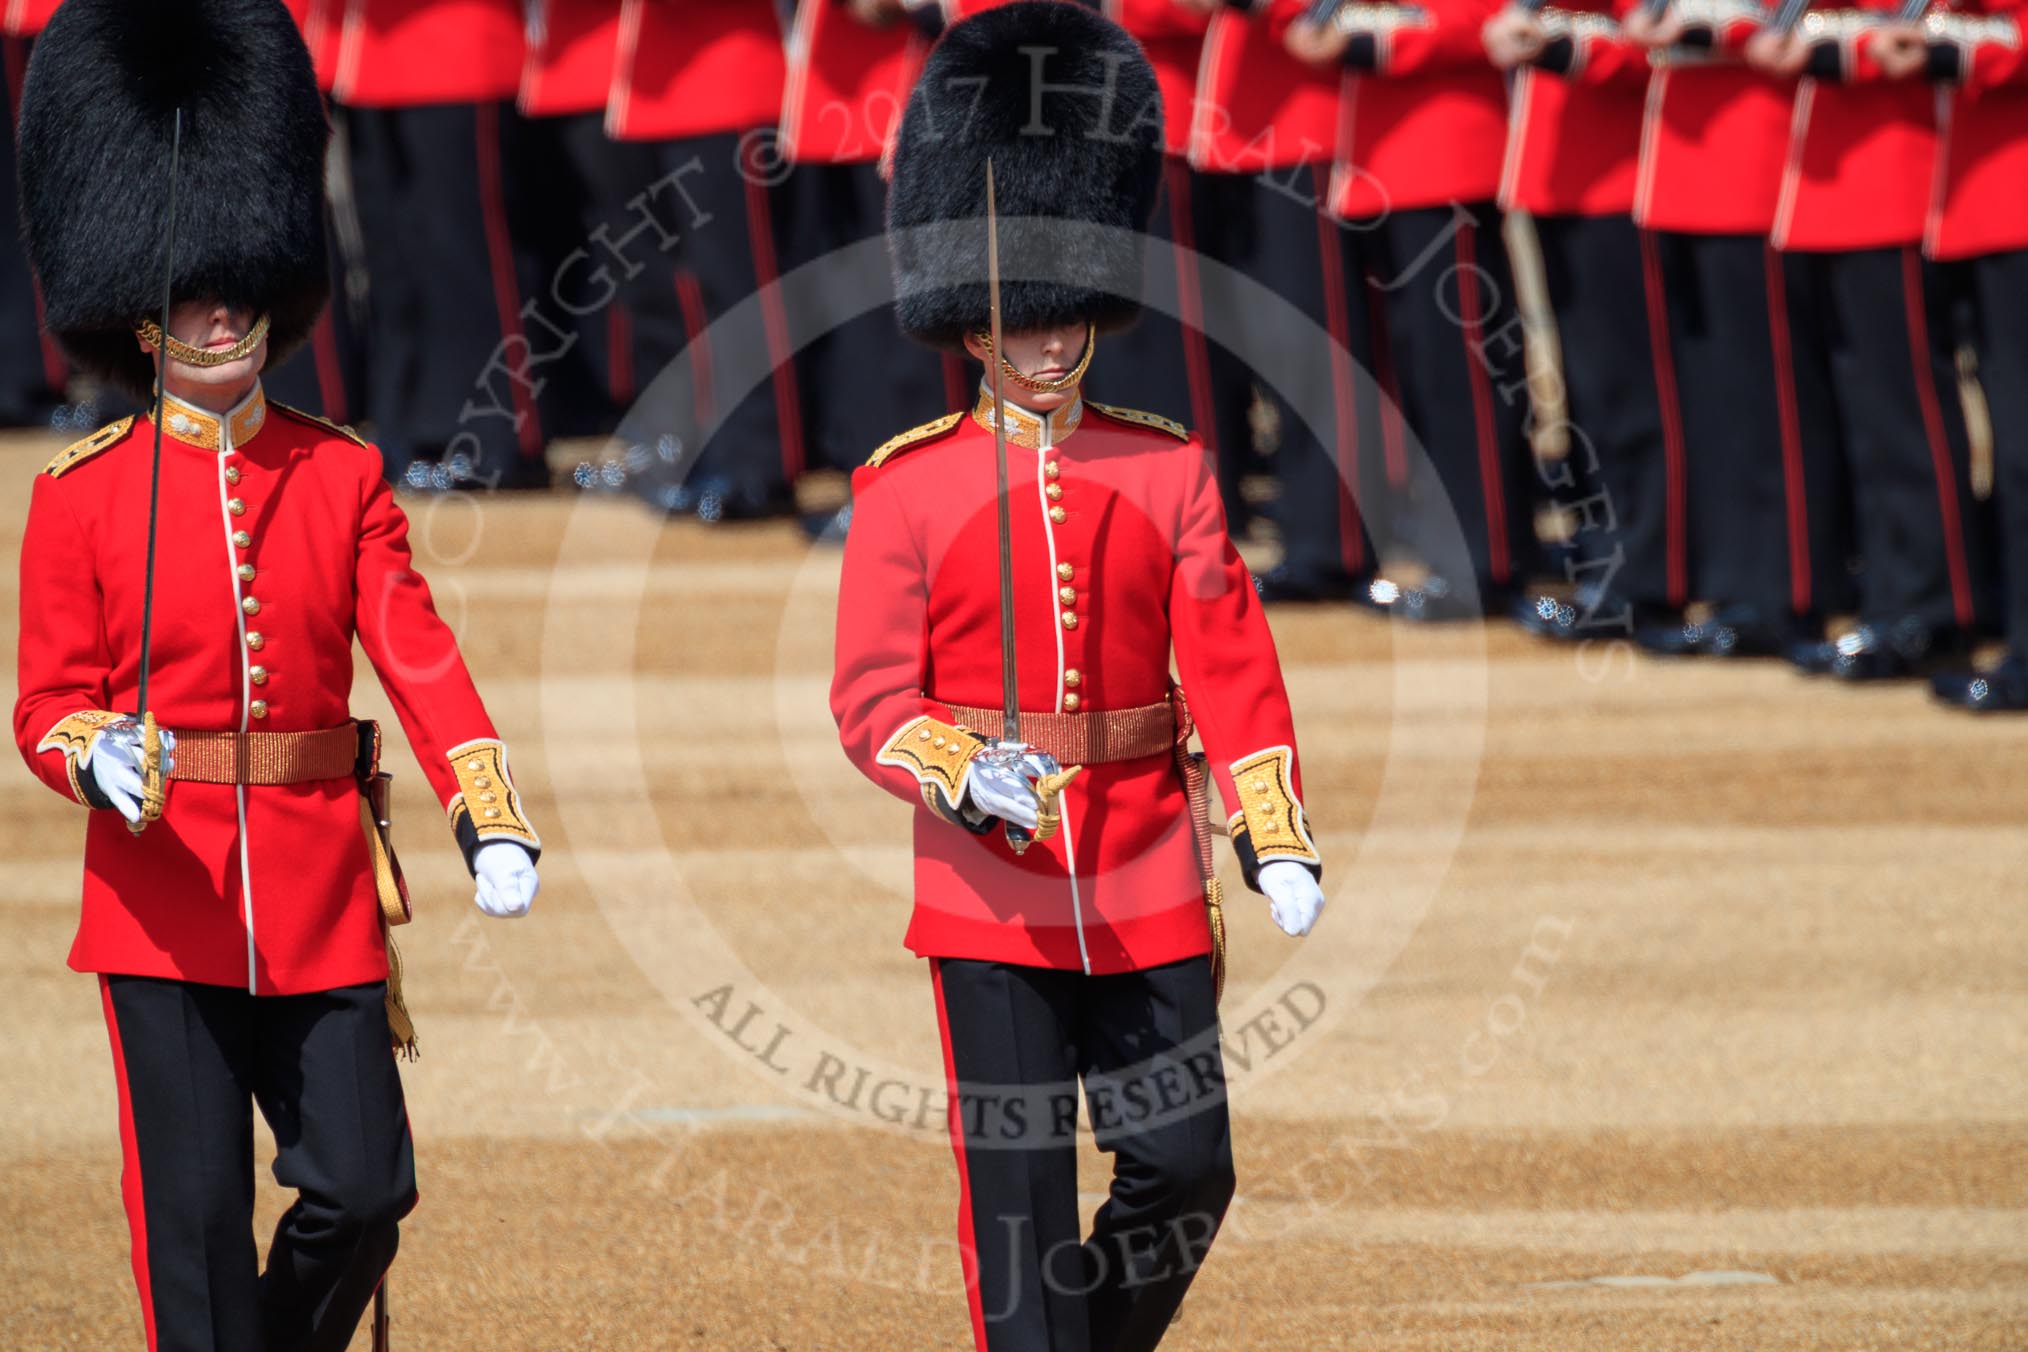 The Subaltern, Lieutenant Jake Sayers, Number Five Guard, Nijmegen Company, Grenadier Guards, and The Subaltern, Captain William Dalton Hall (27), Number Six Guard, F Company, Scots Guards, marching towards Horse Guards Arch during Trooping the Colour 2018, The Queen's Birthday Parade at Horse Guards Parade, Westminster, London, 9 June 2018, 10:29.